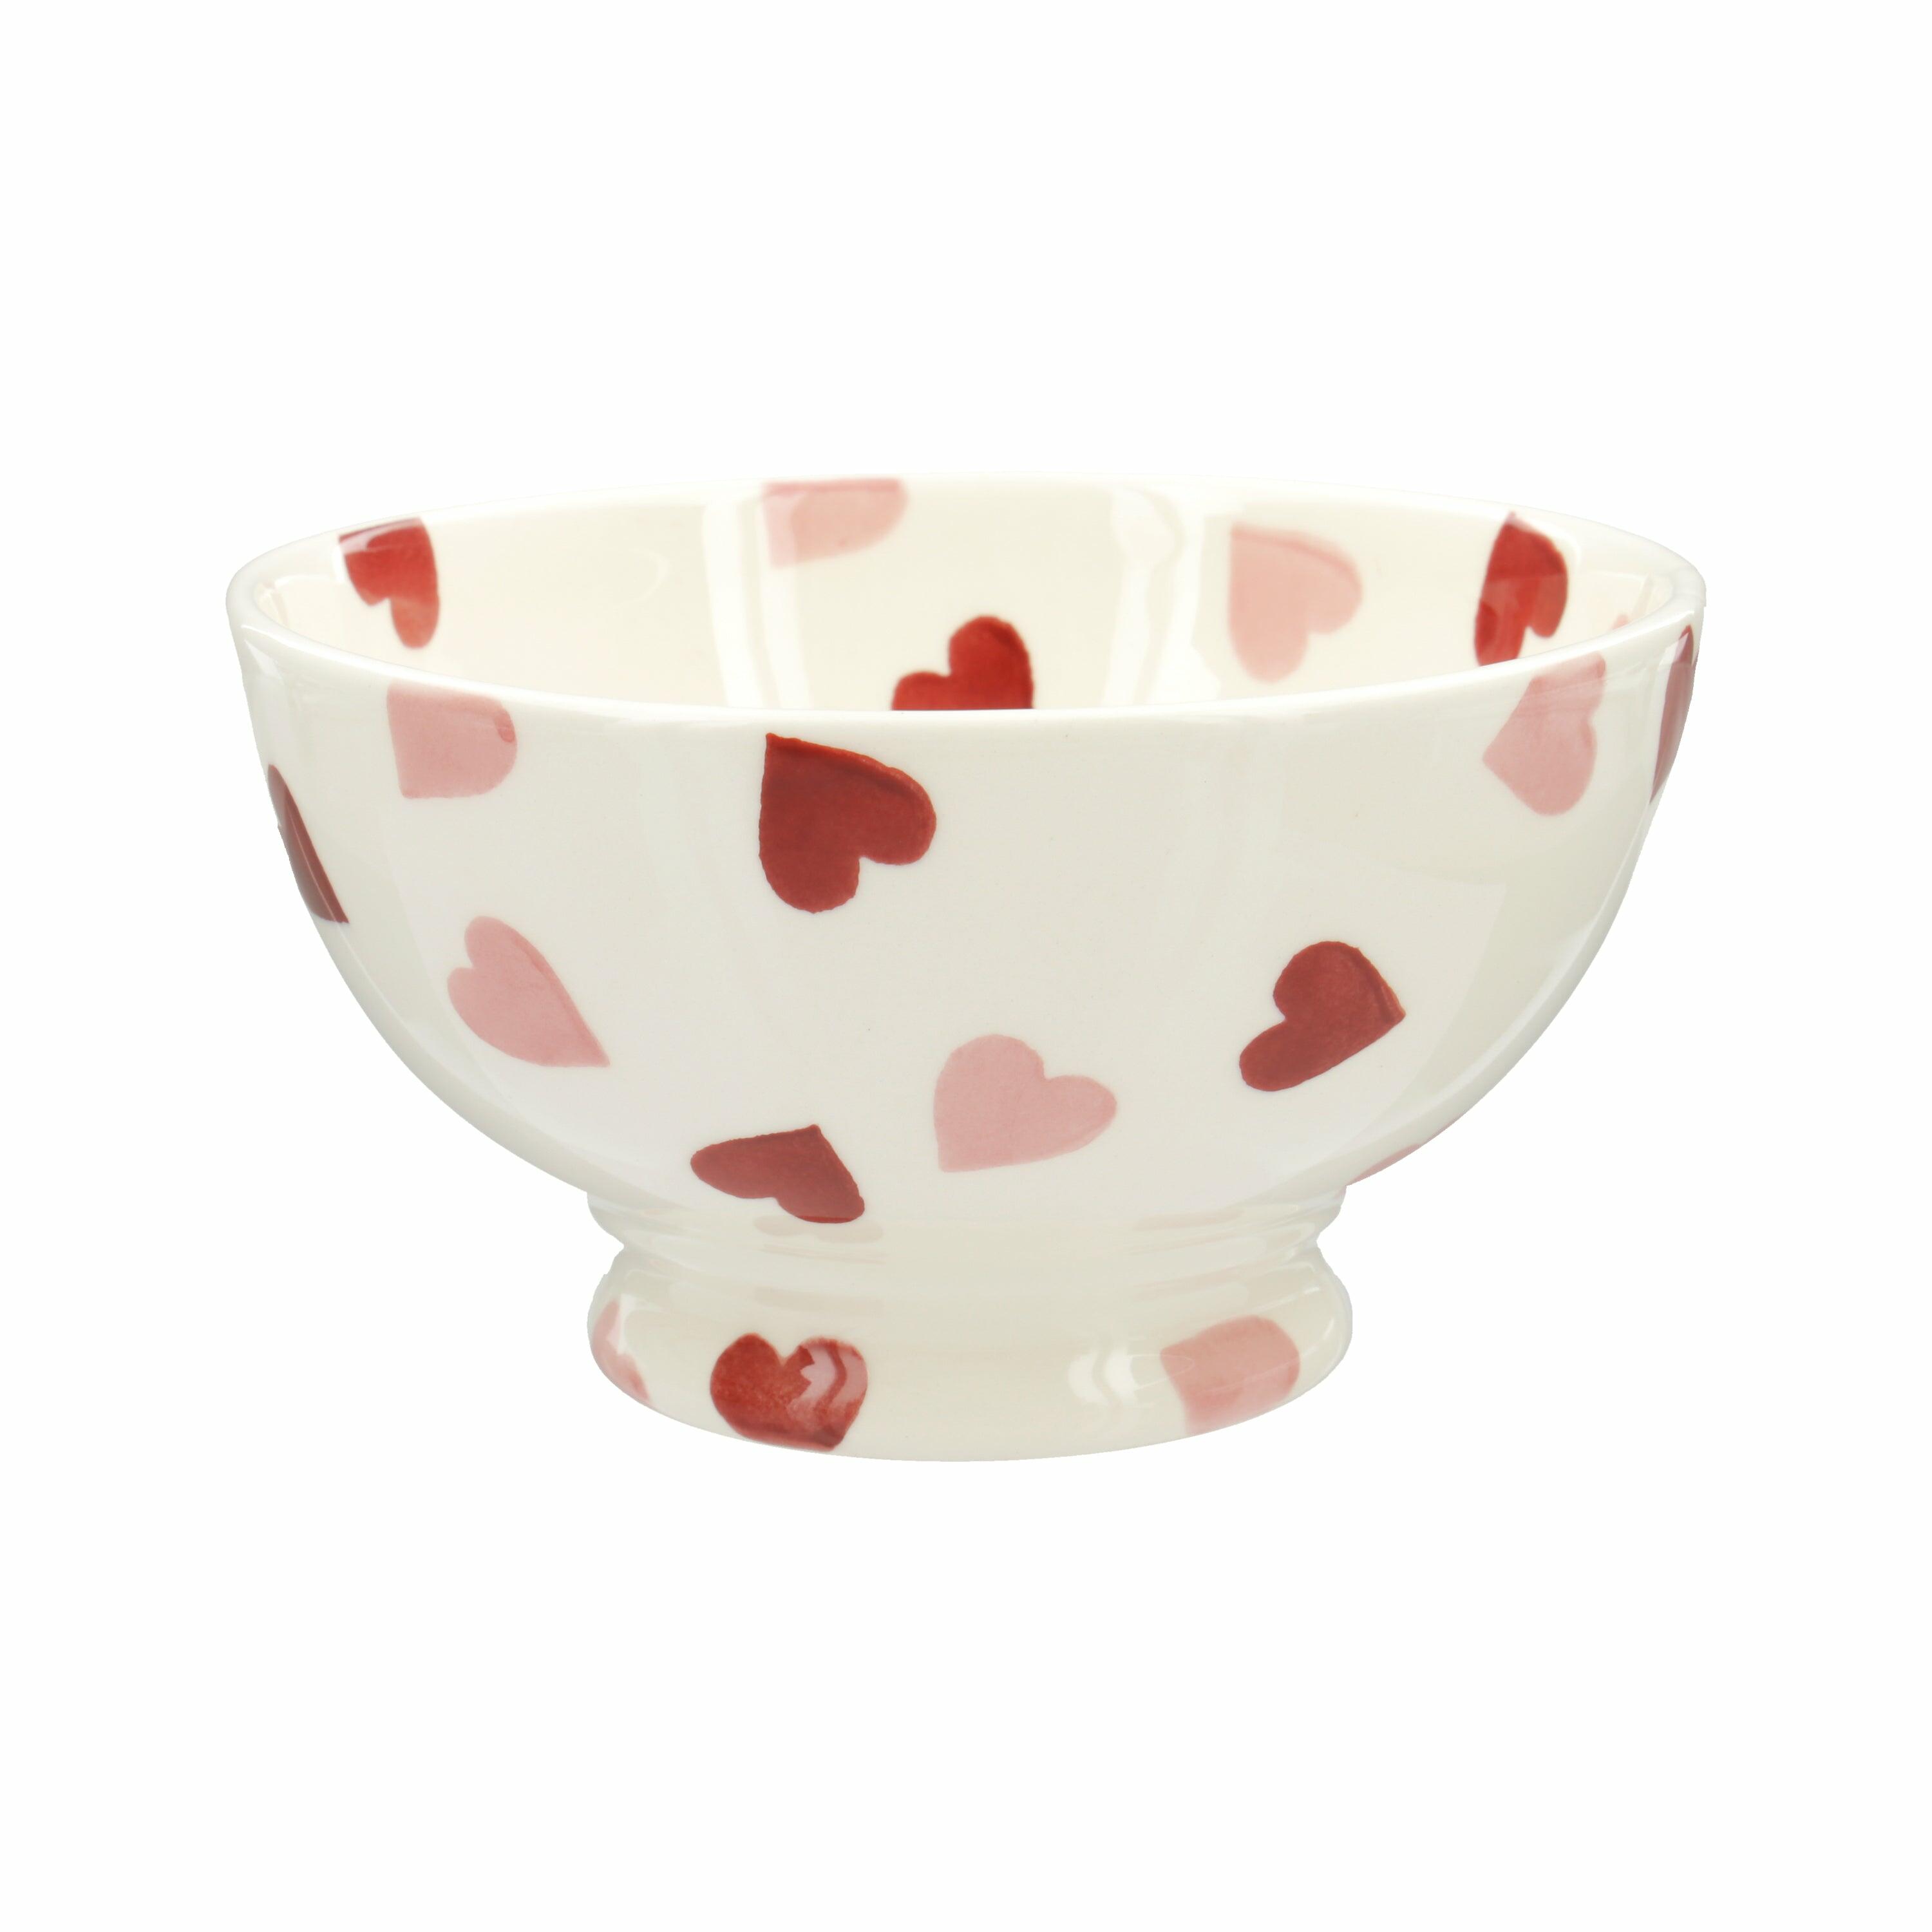 Seconds Pink Hearts French Bowl - Unique Handmade & Handpainted English Earthenware Decorative Plates  | Emma Bridgewater